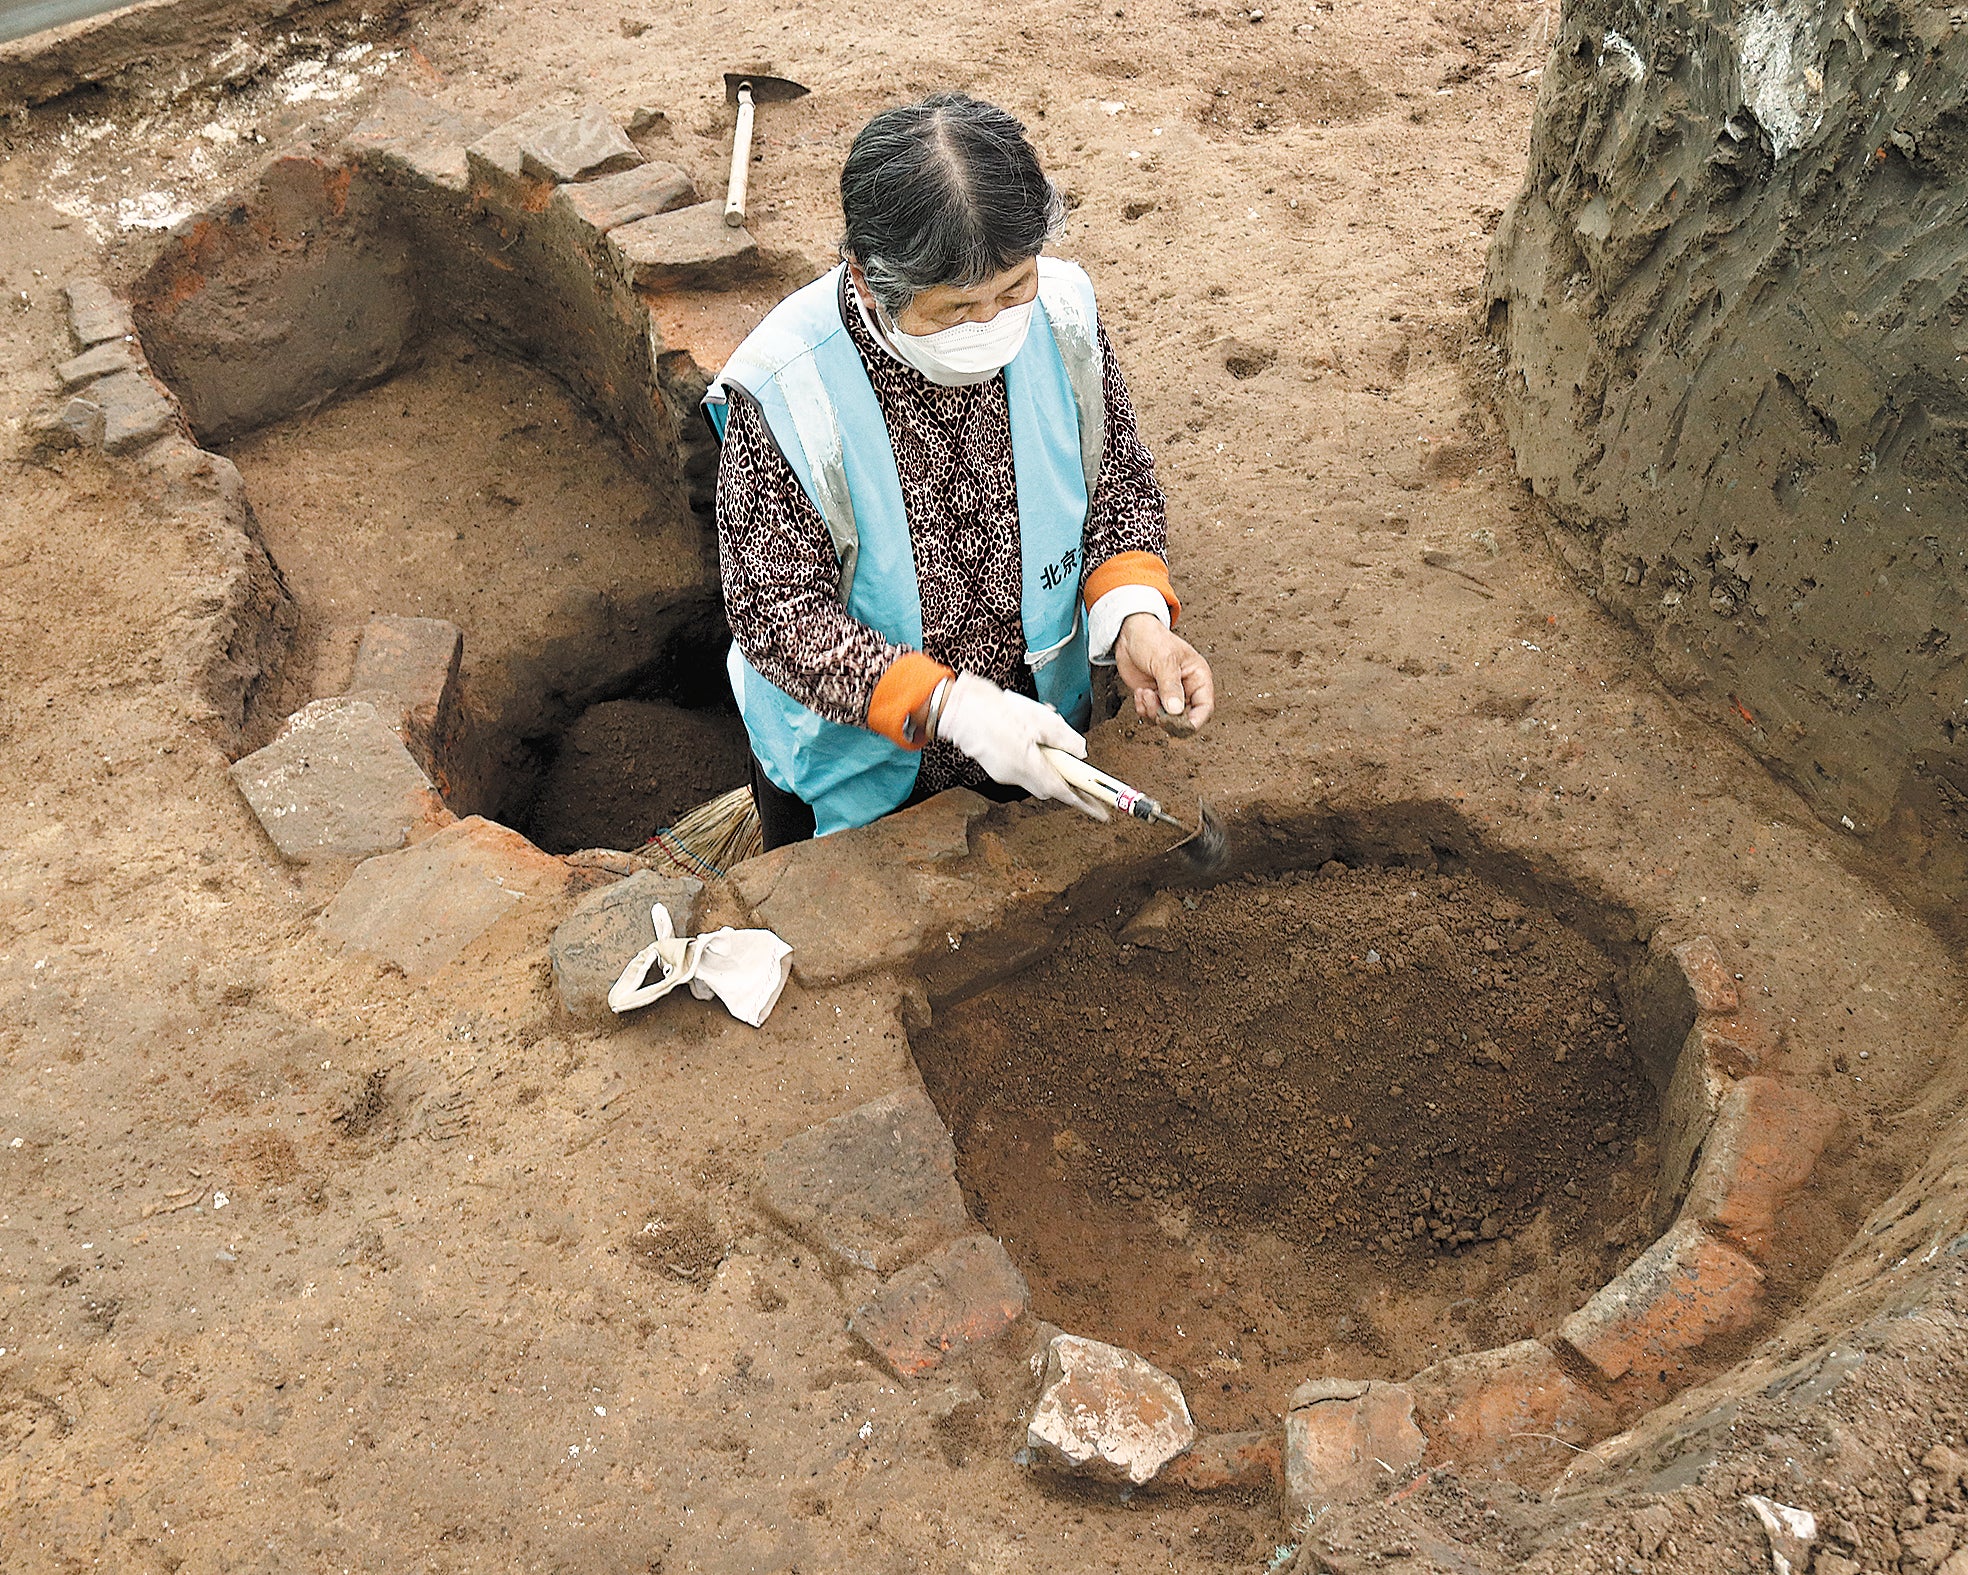 A technician works on excavation at the Zhongdu site of the Jin Dynasty (1115-1234) in Beijing